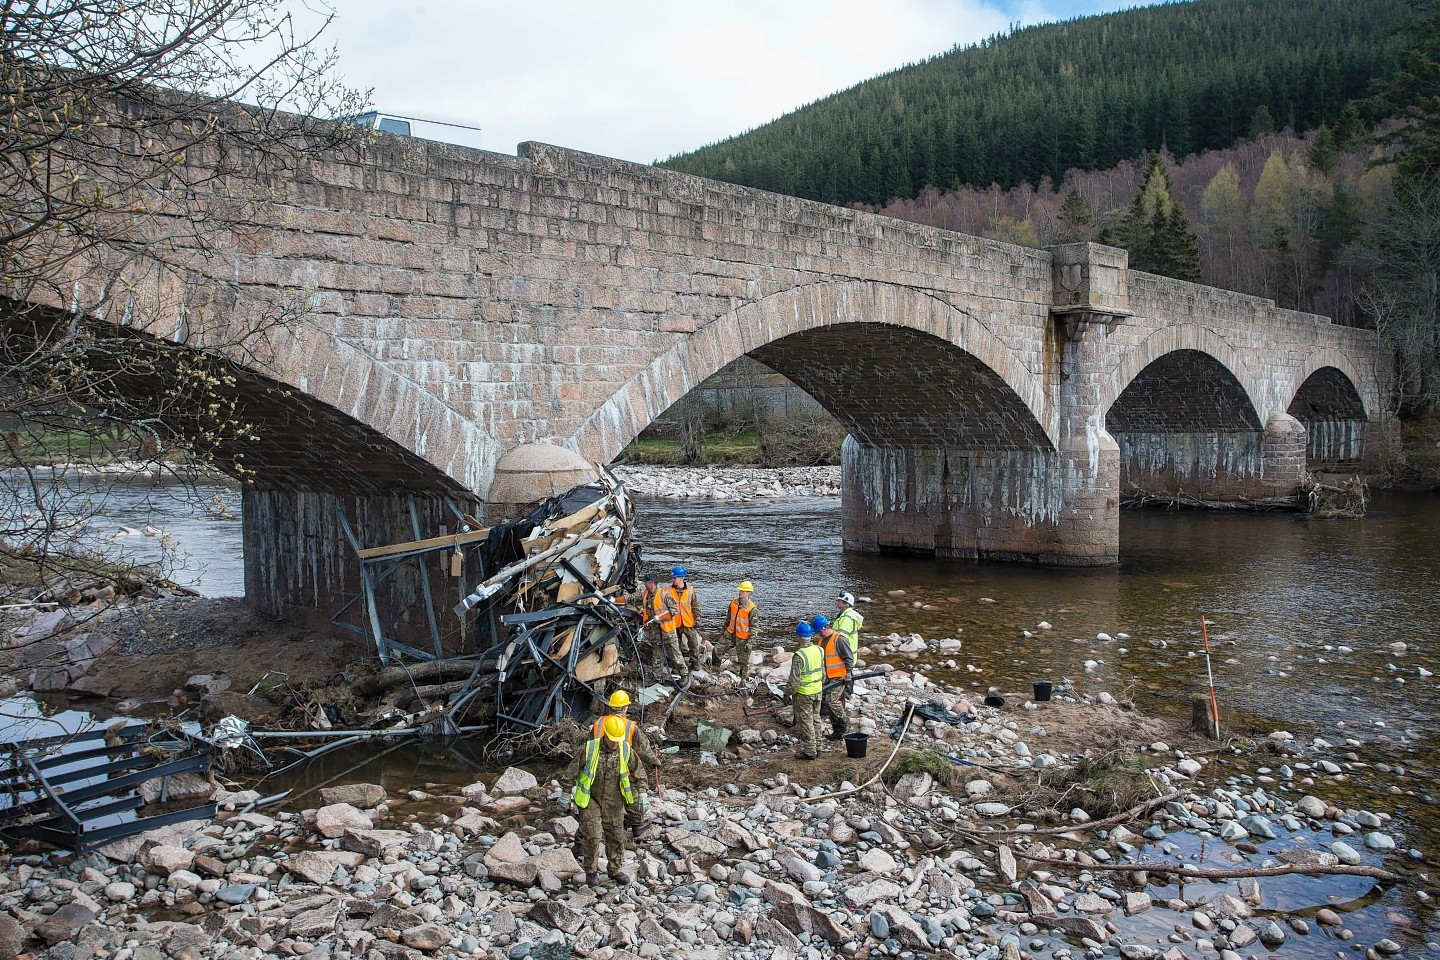 Troops got to work removing debris from the arches of Ballater's Royal Bridge